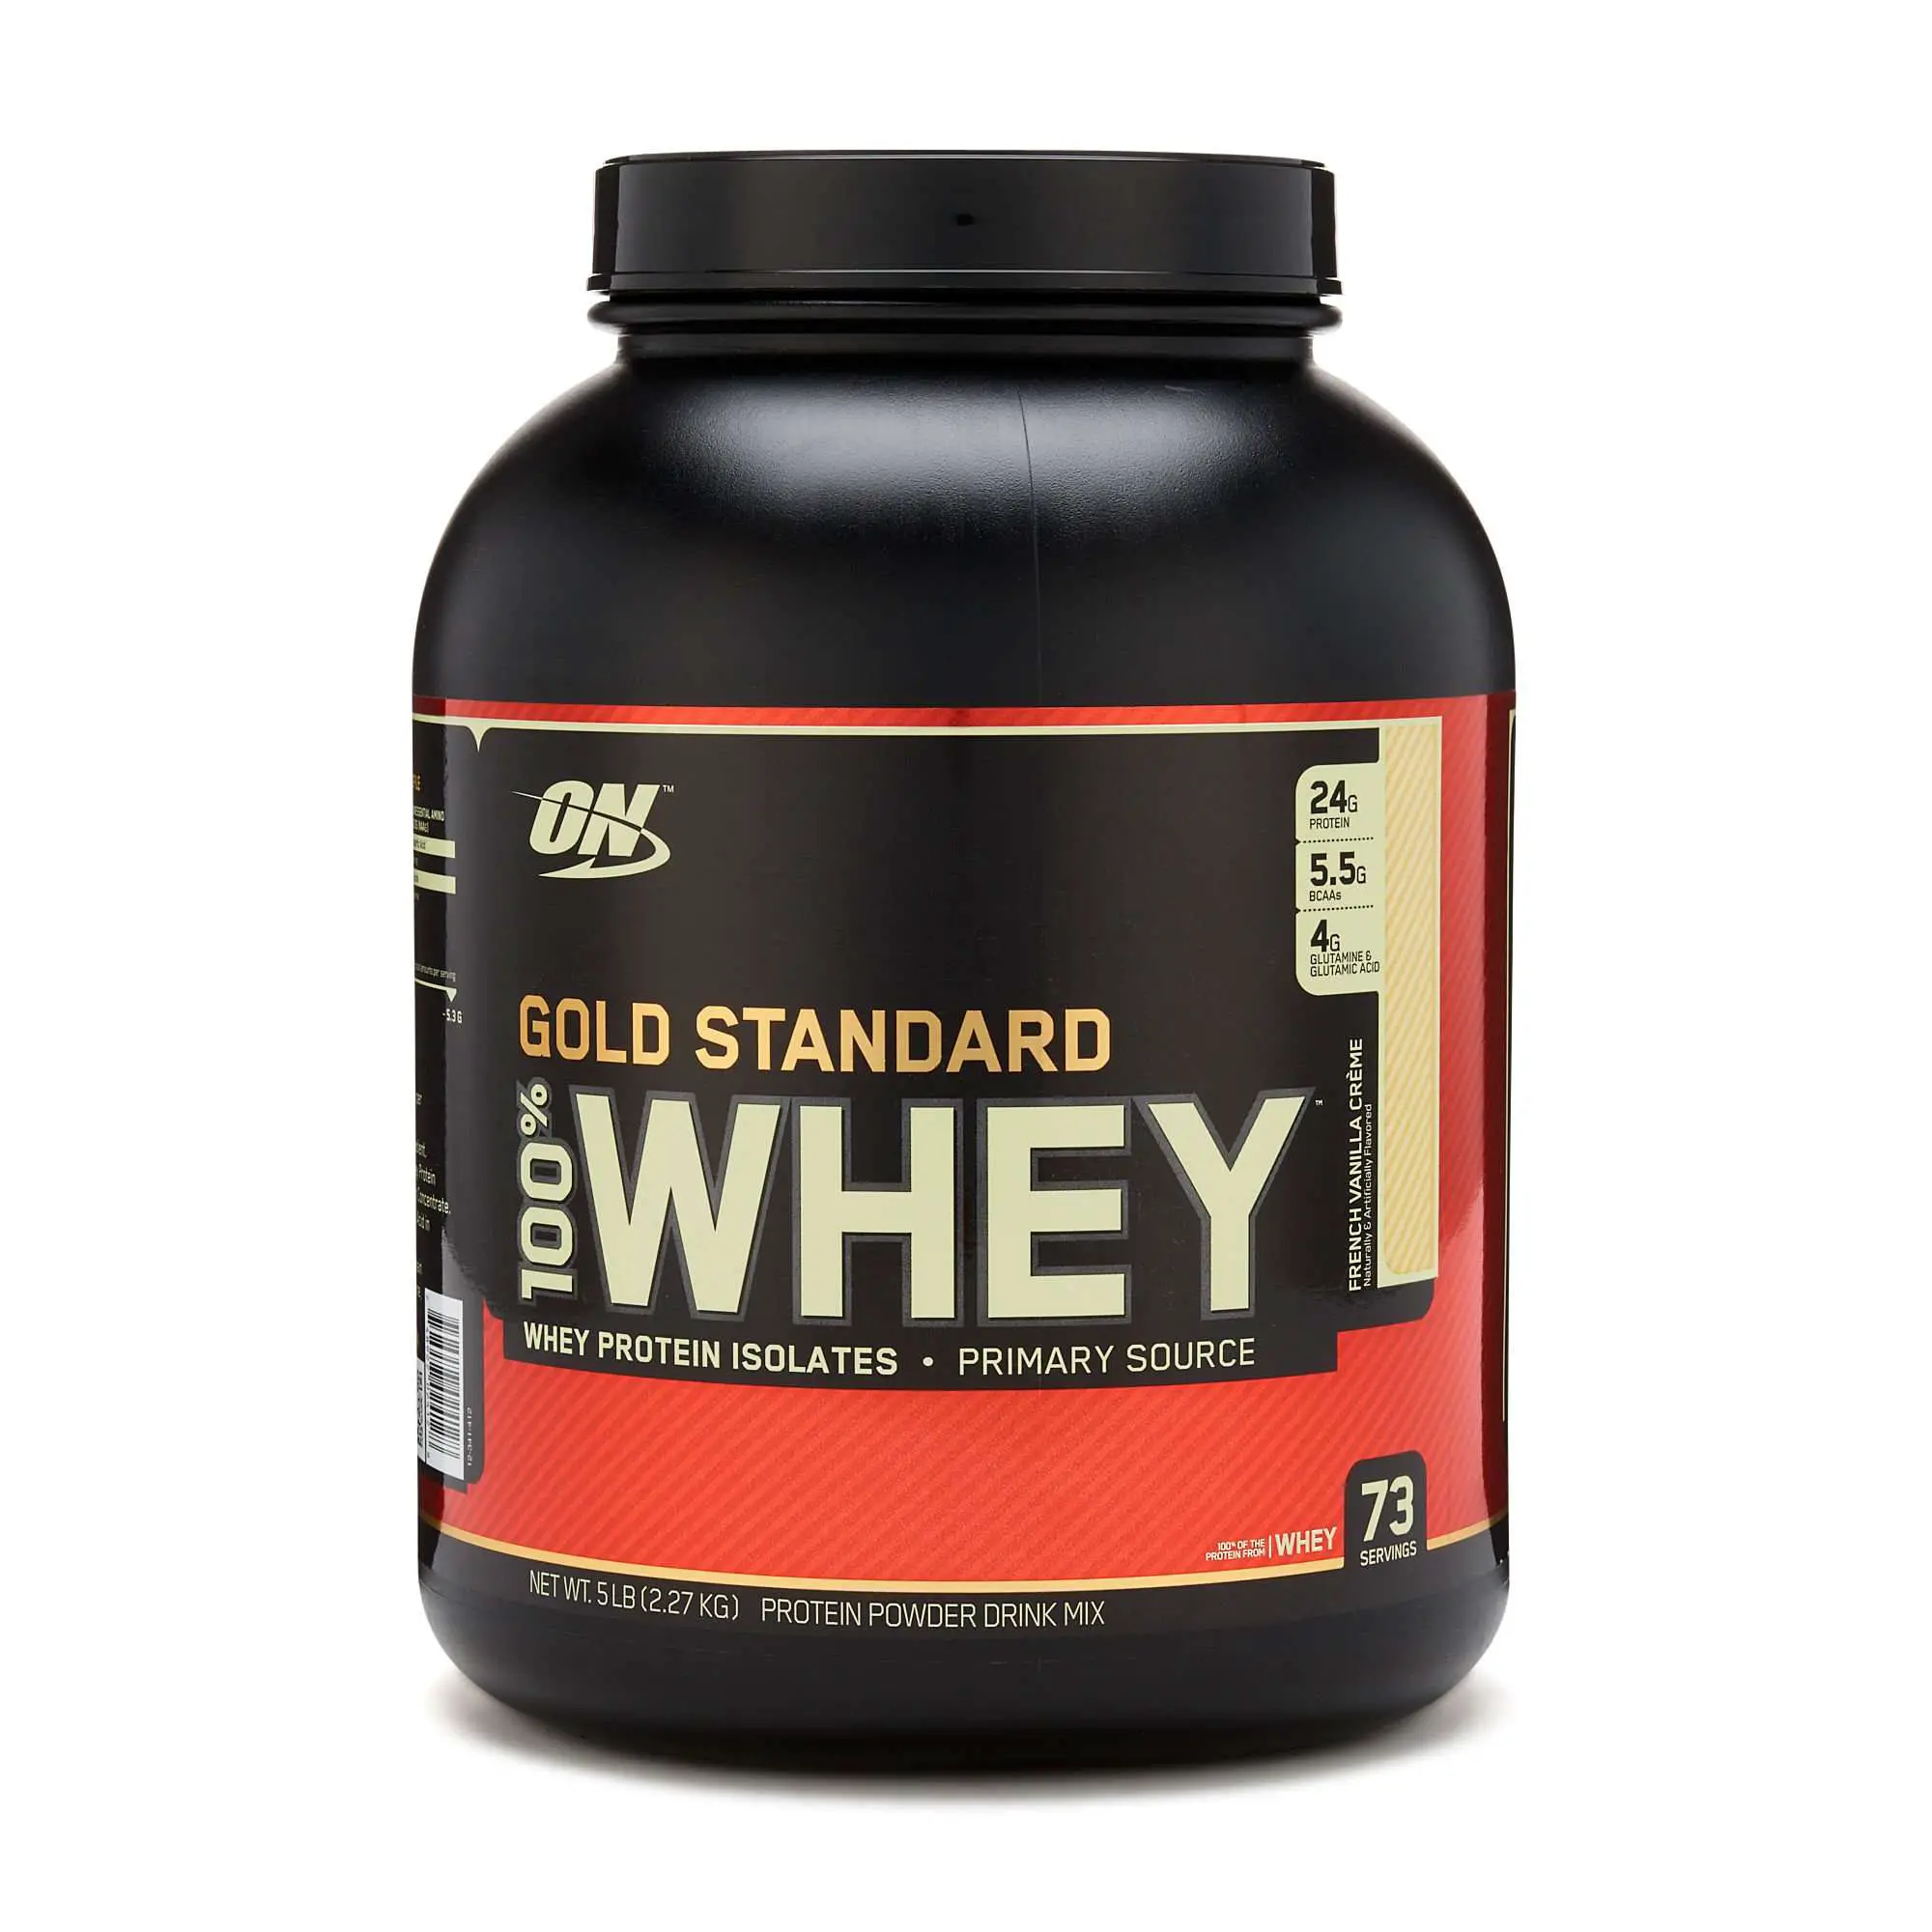 Whey Gold Standard Review